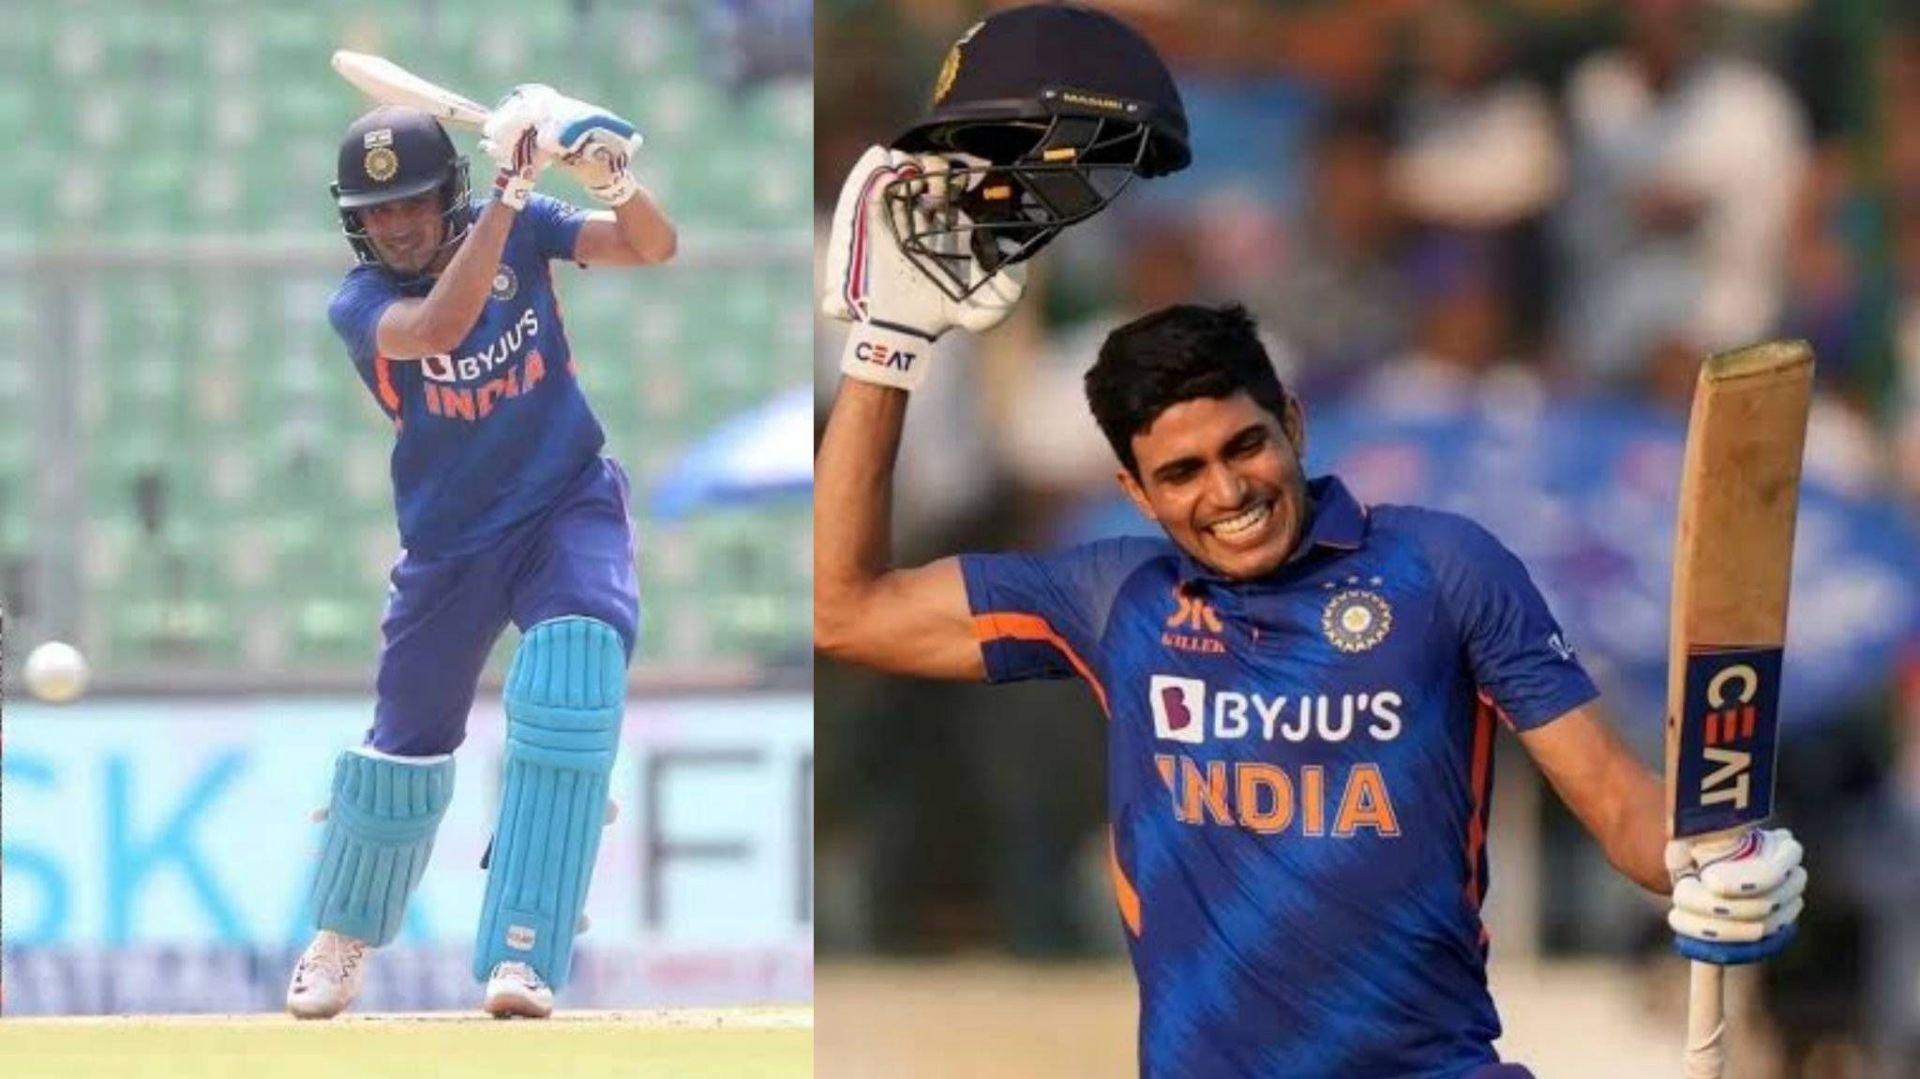 Should Shubman Gill bat at number 4 for India in ODIs?